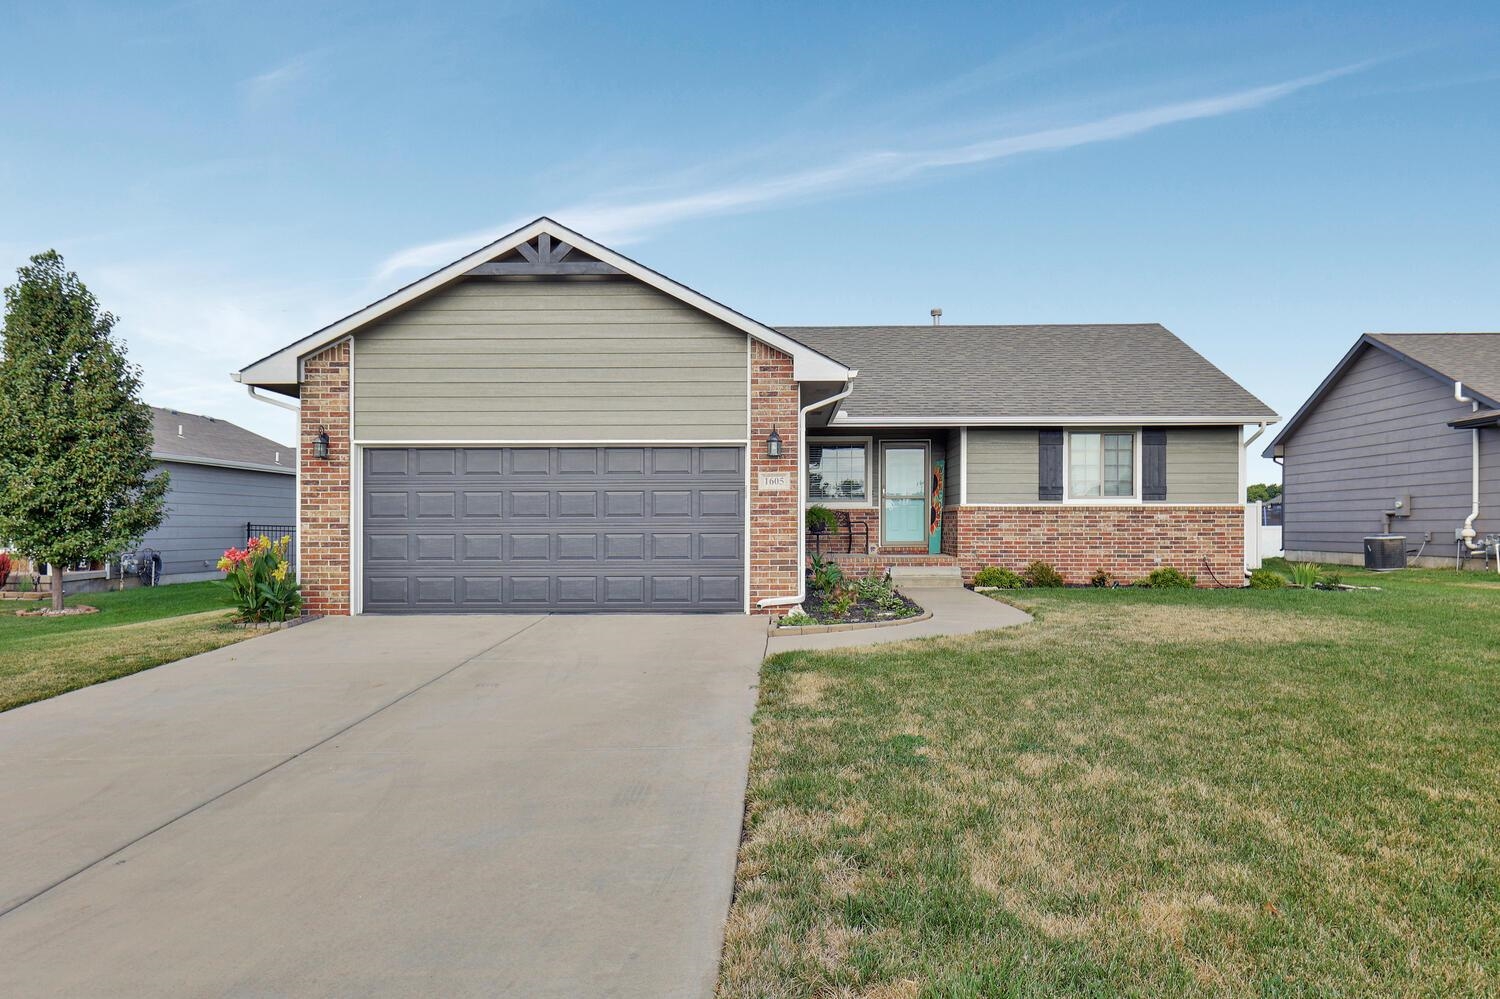 Gorgeous Ranch style home in Maize School Districts. The home features an open floor plan with large